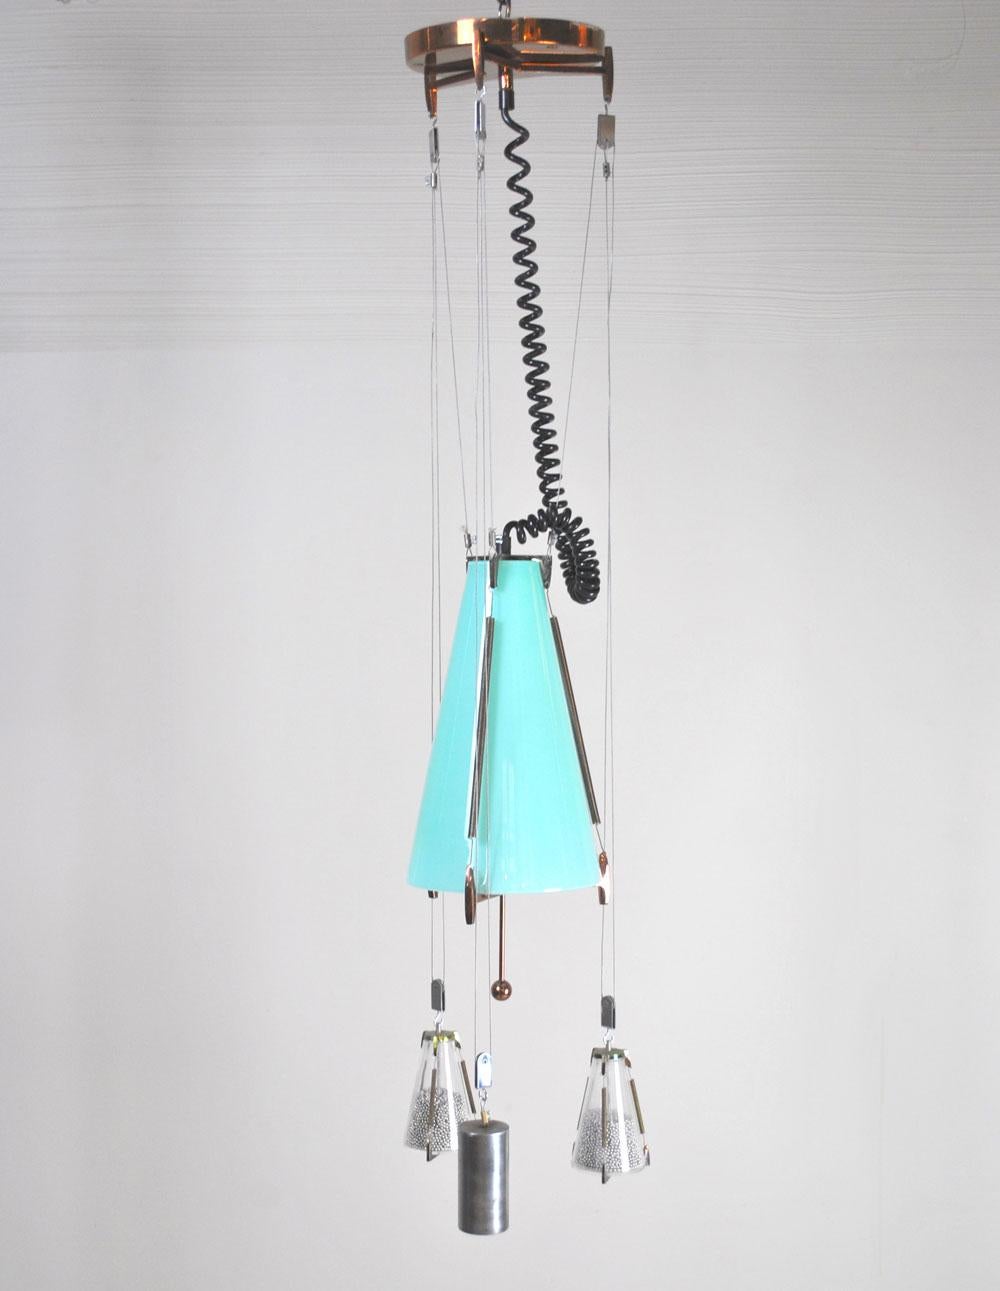 Mid-20th Century Italian Midcentury Chandelier in the Atomic Style from the 1950s For Sale